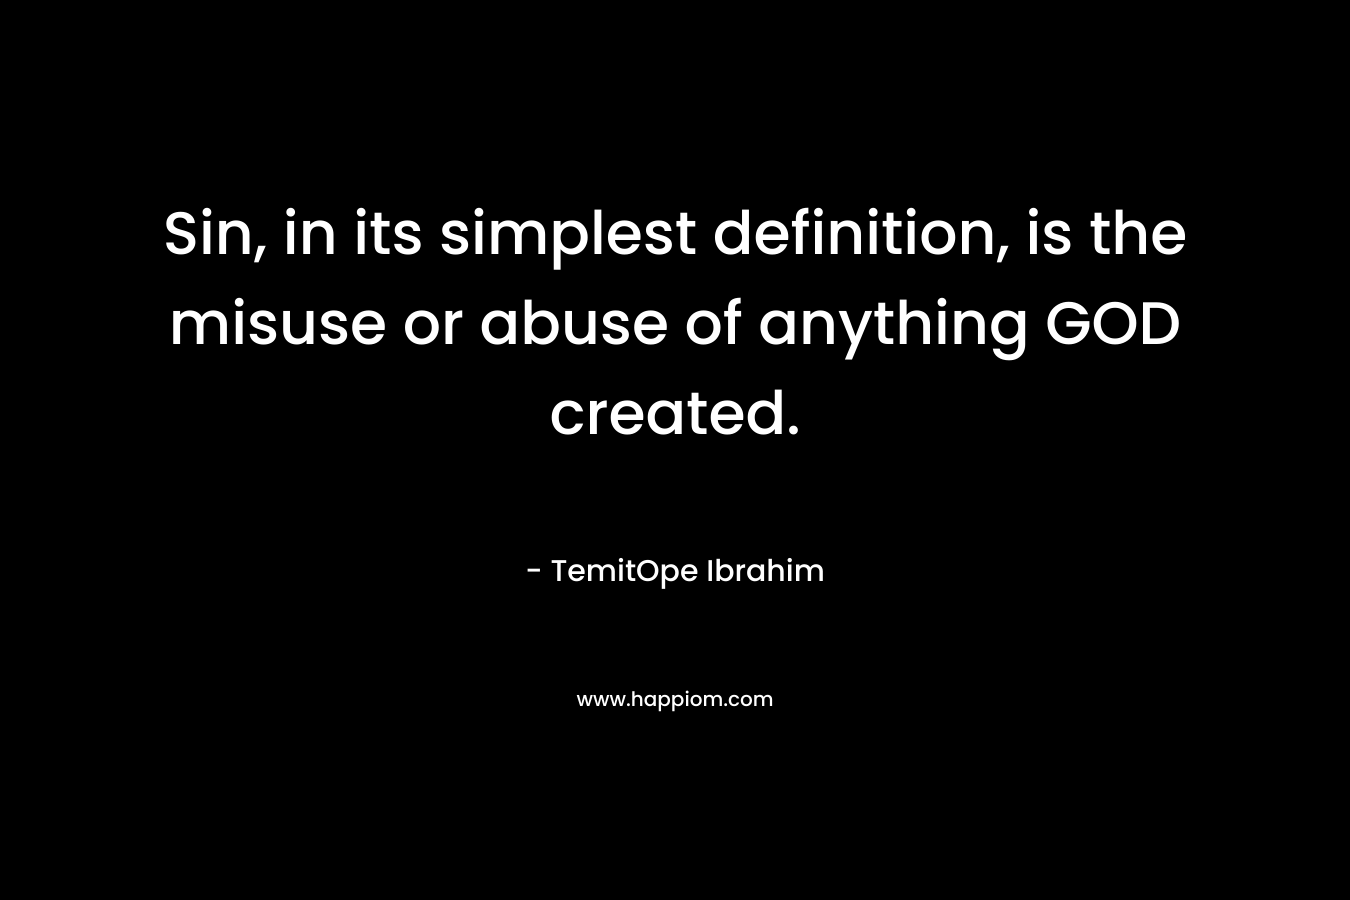 Sin, in its simplest definition, is the misuse or abuse of anything GOD created.